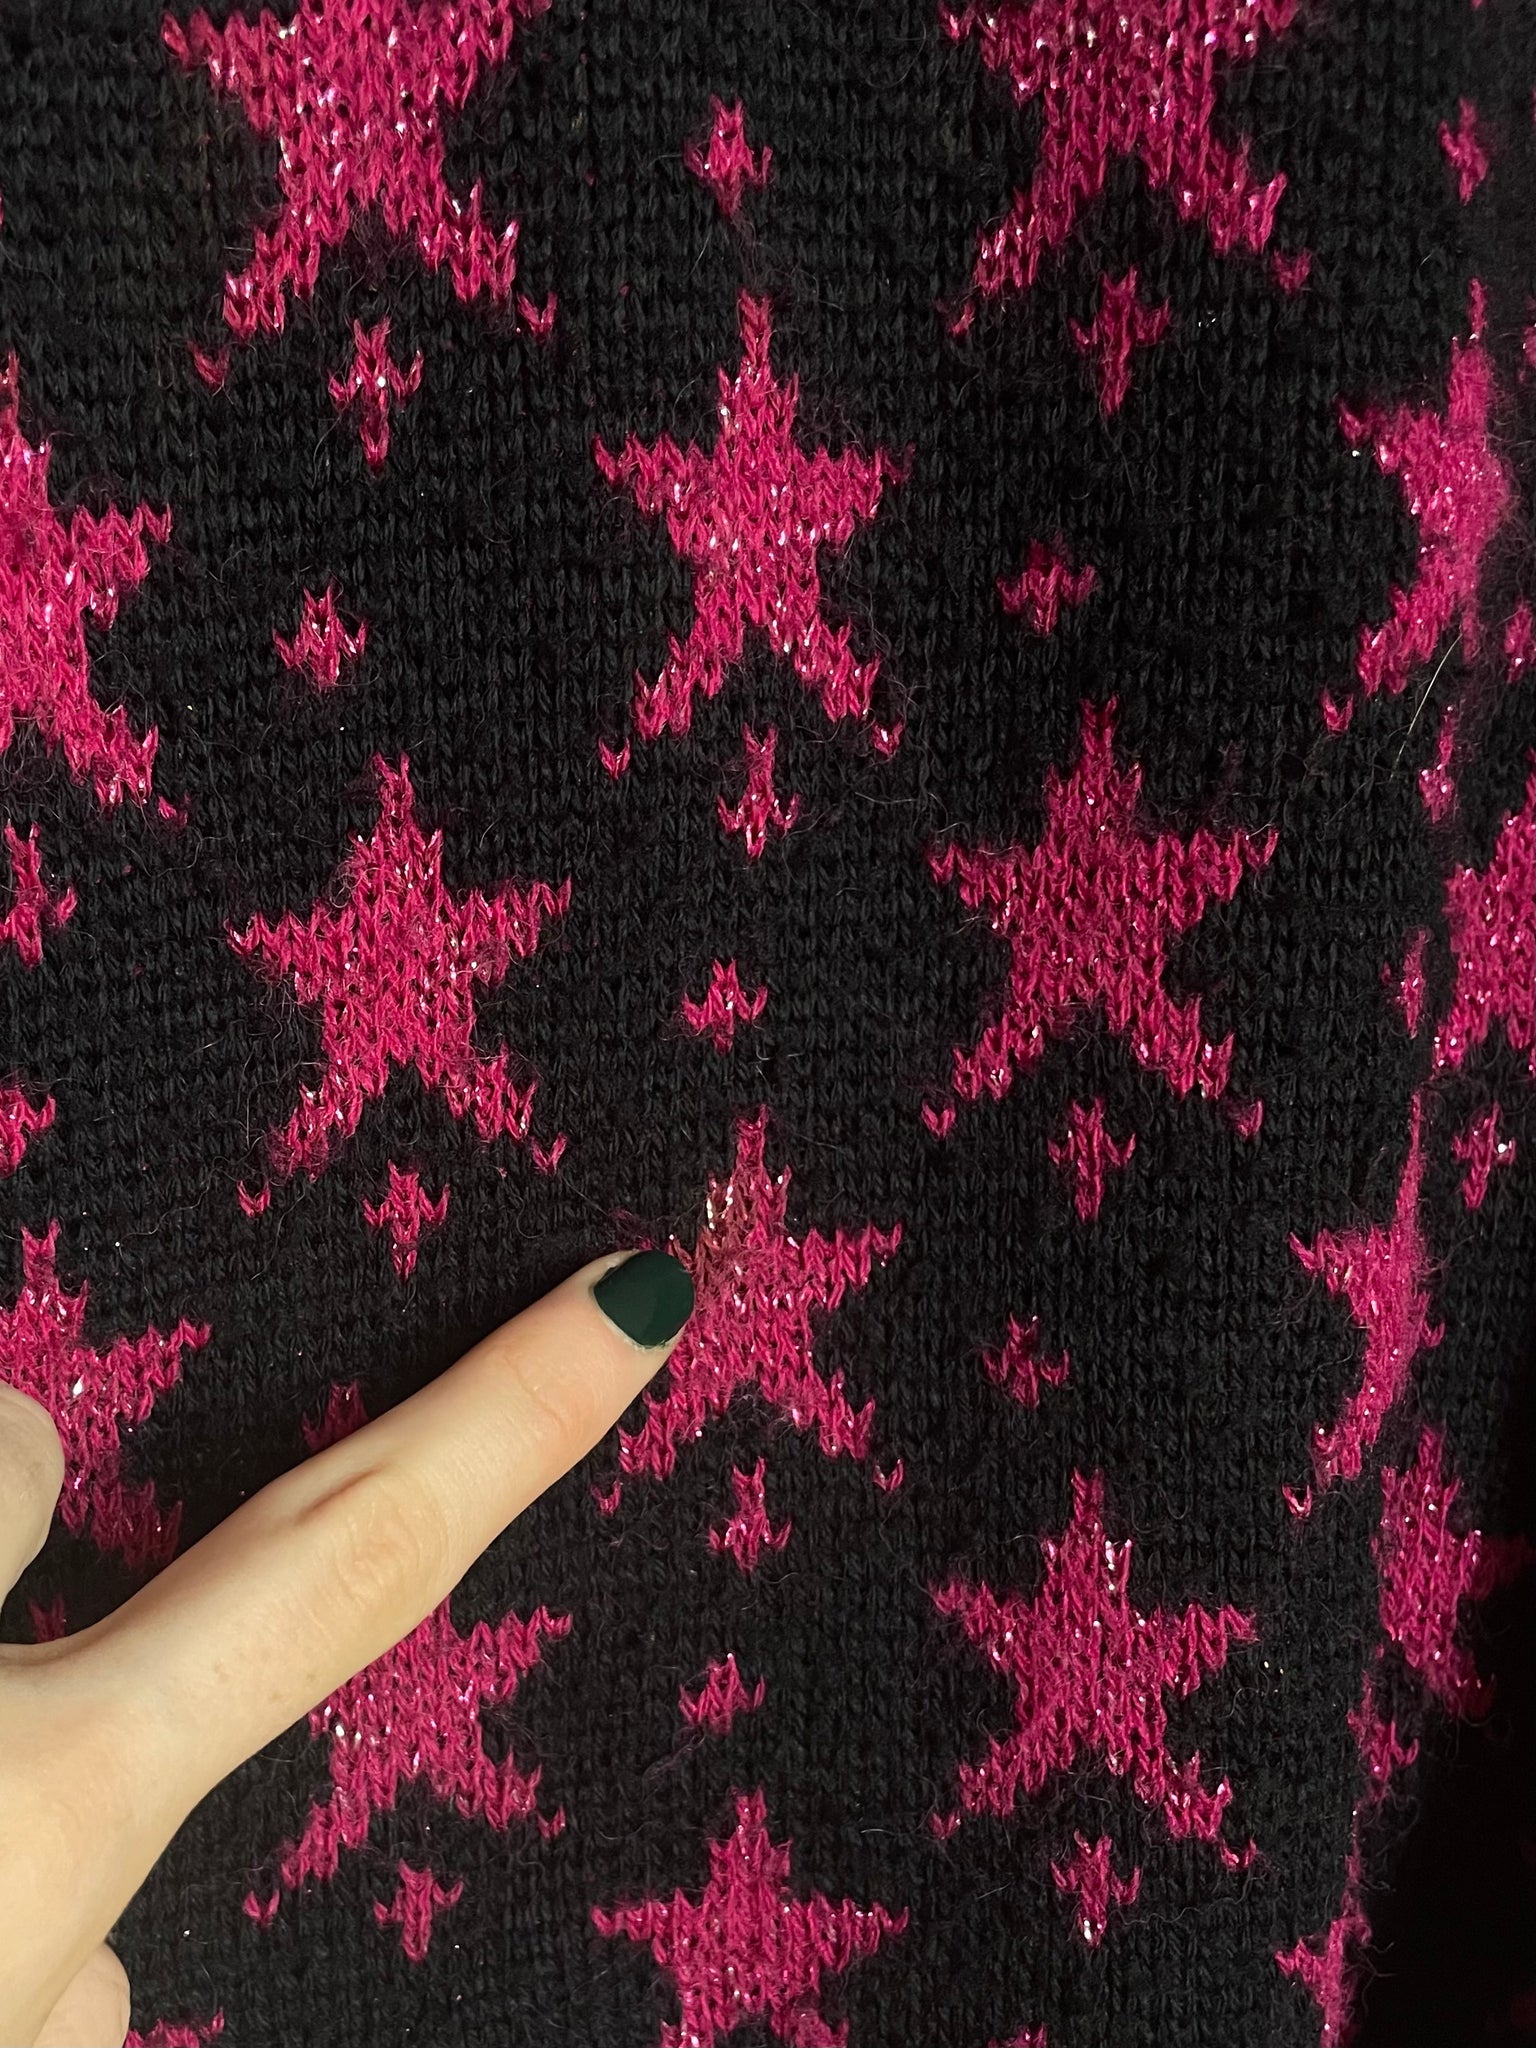 1980s Black Pink Star Sweater Sparkle Knit Pullover